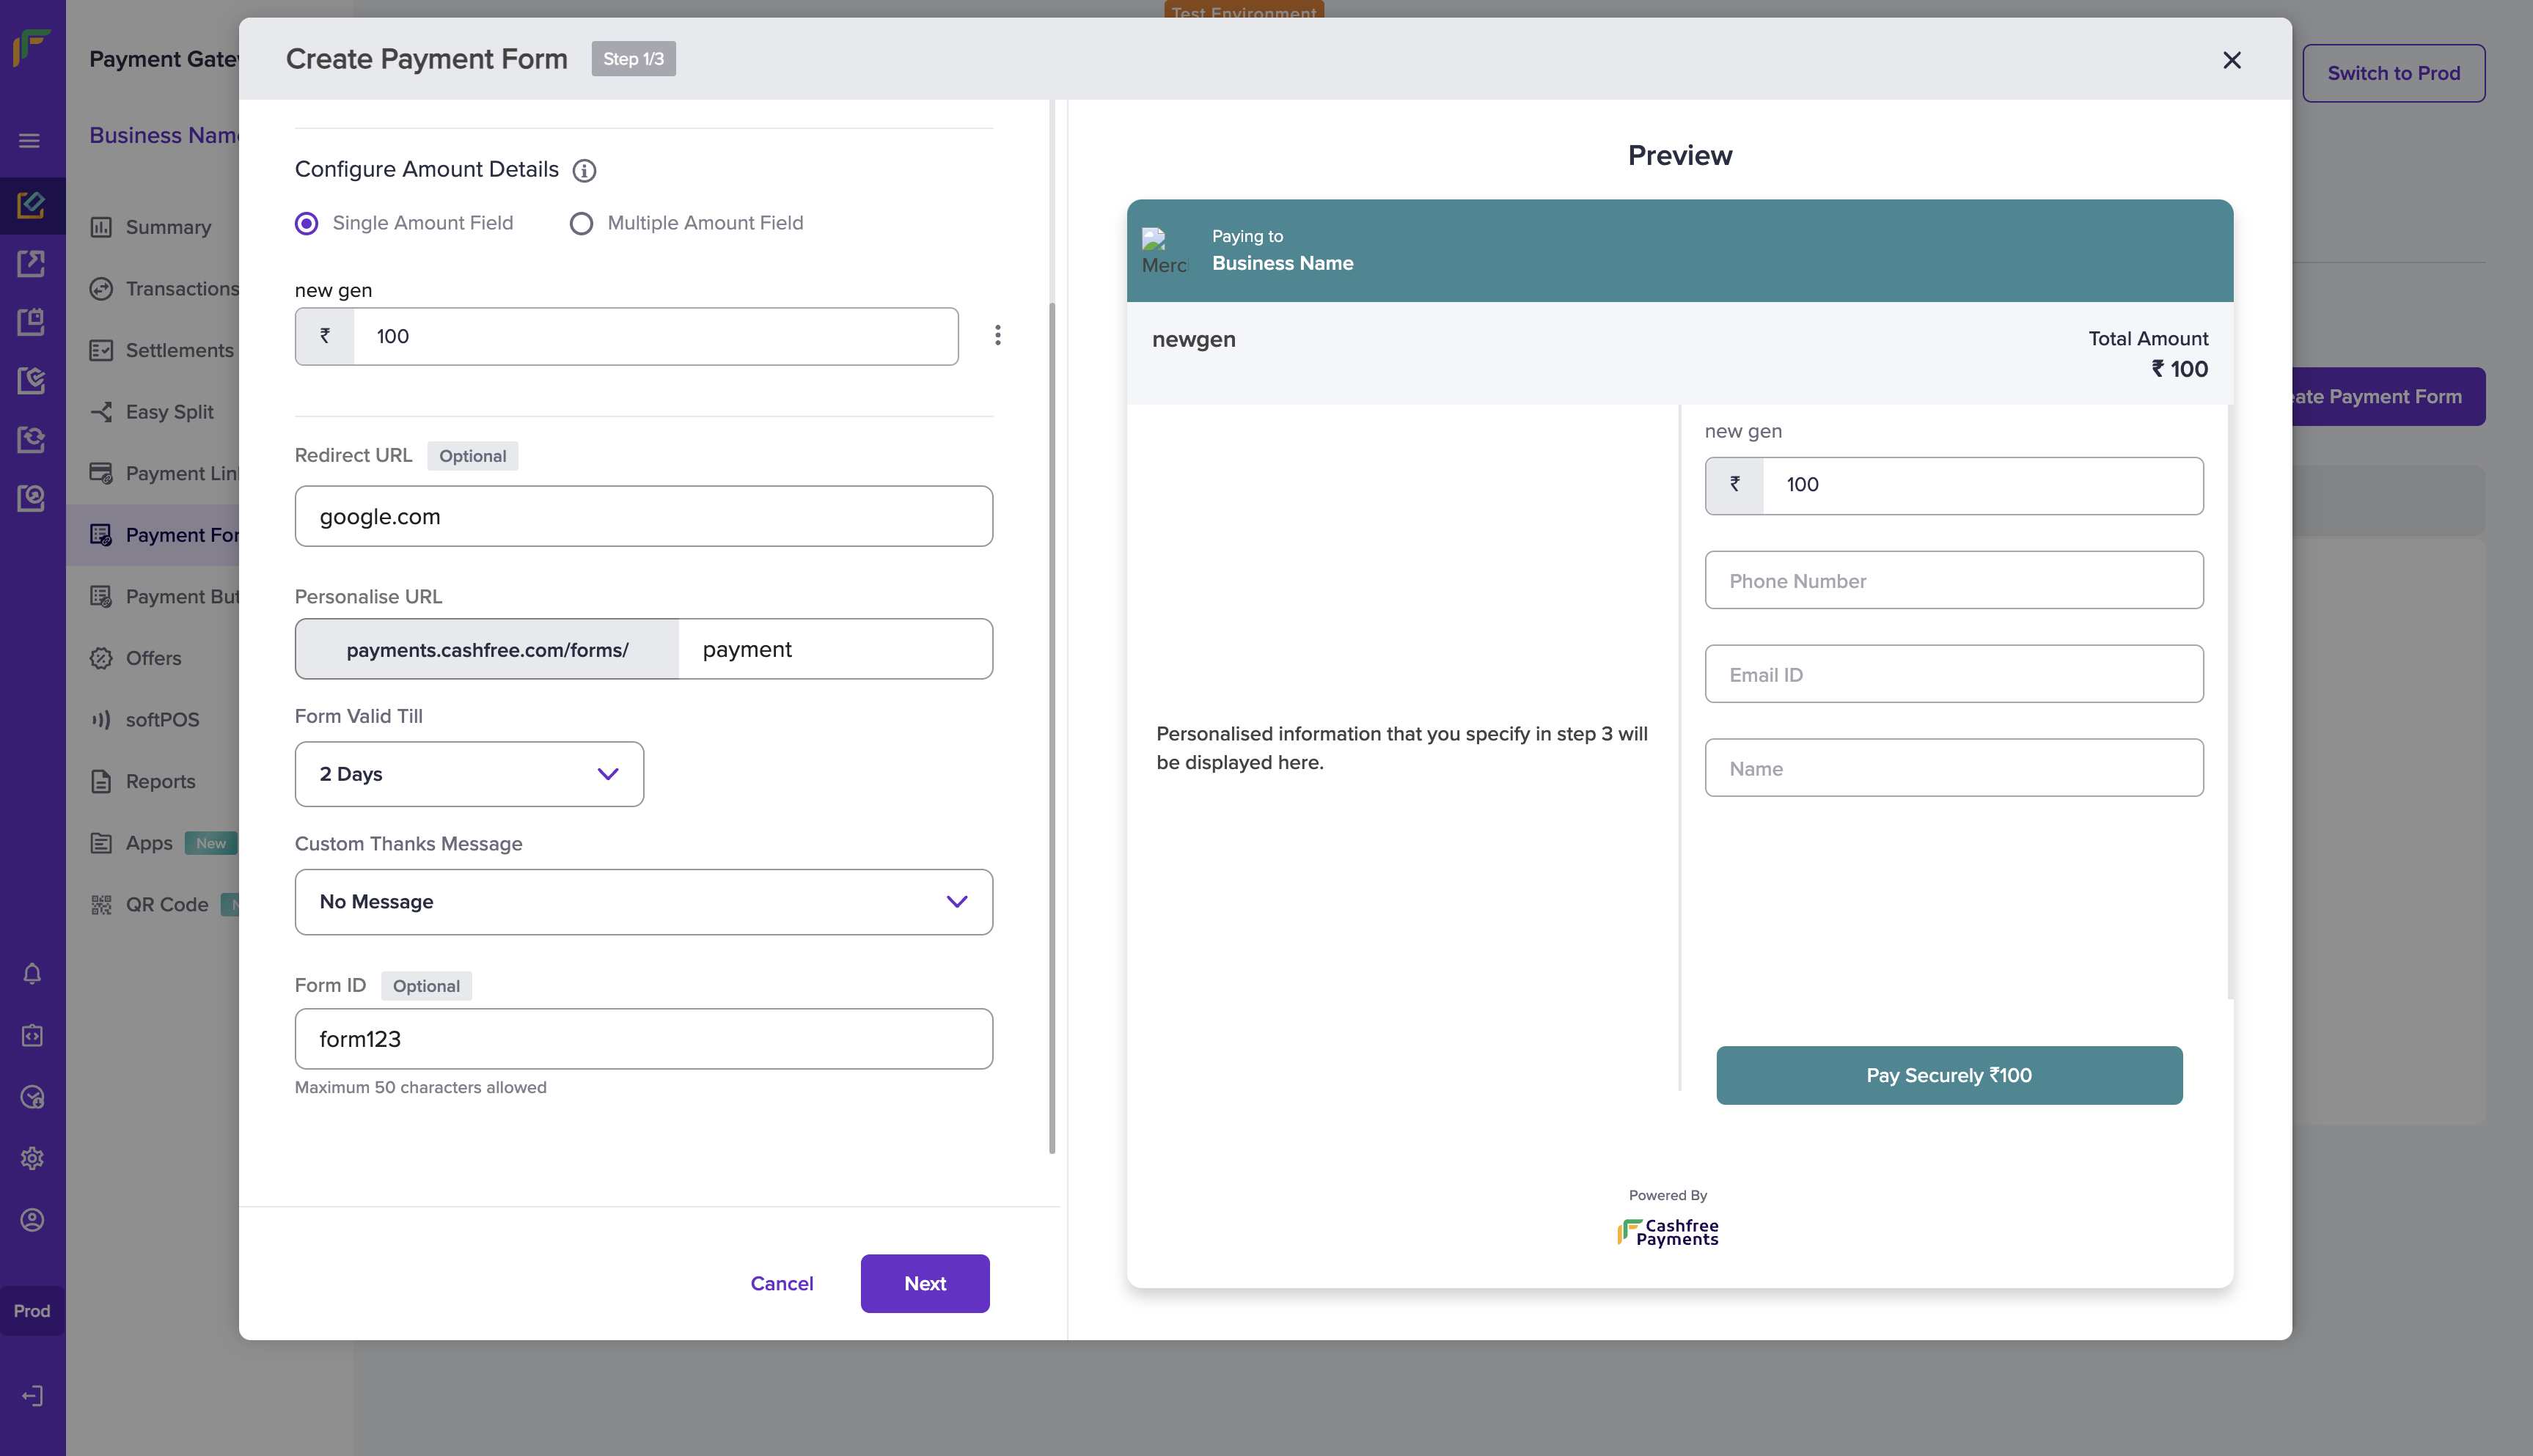 Create Payment Forms - Add Details 